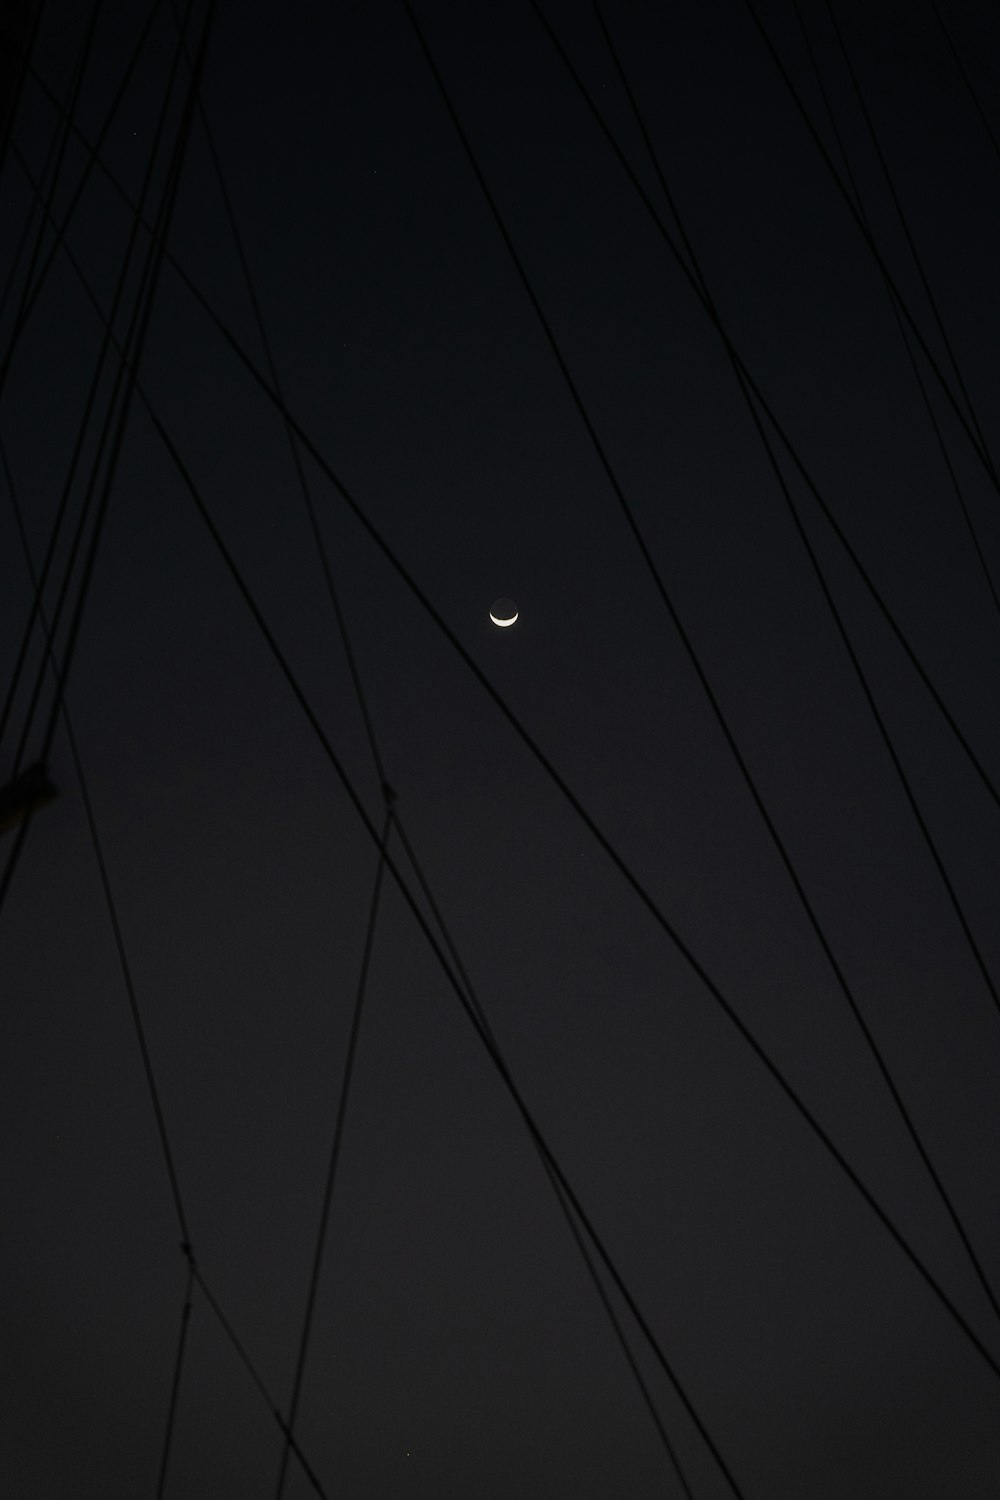 the moon and venus are seen through the power lines